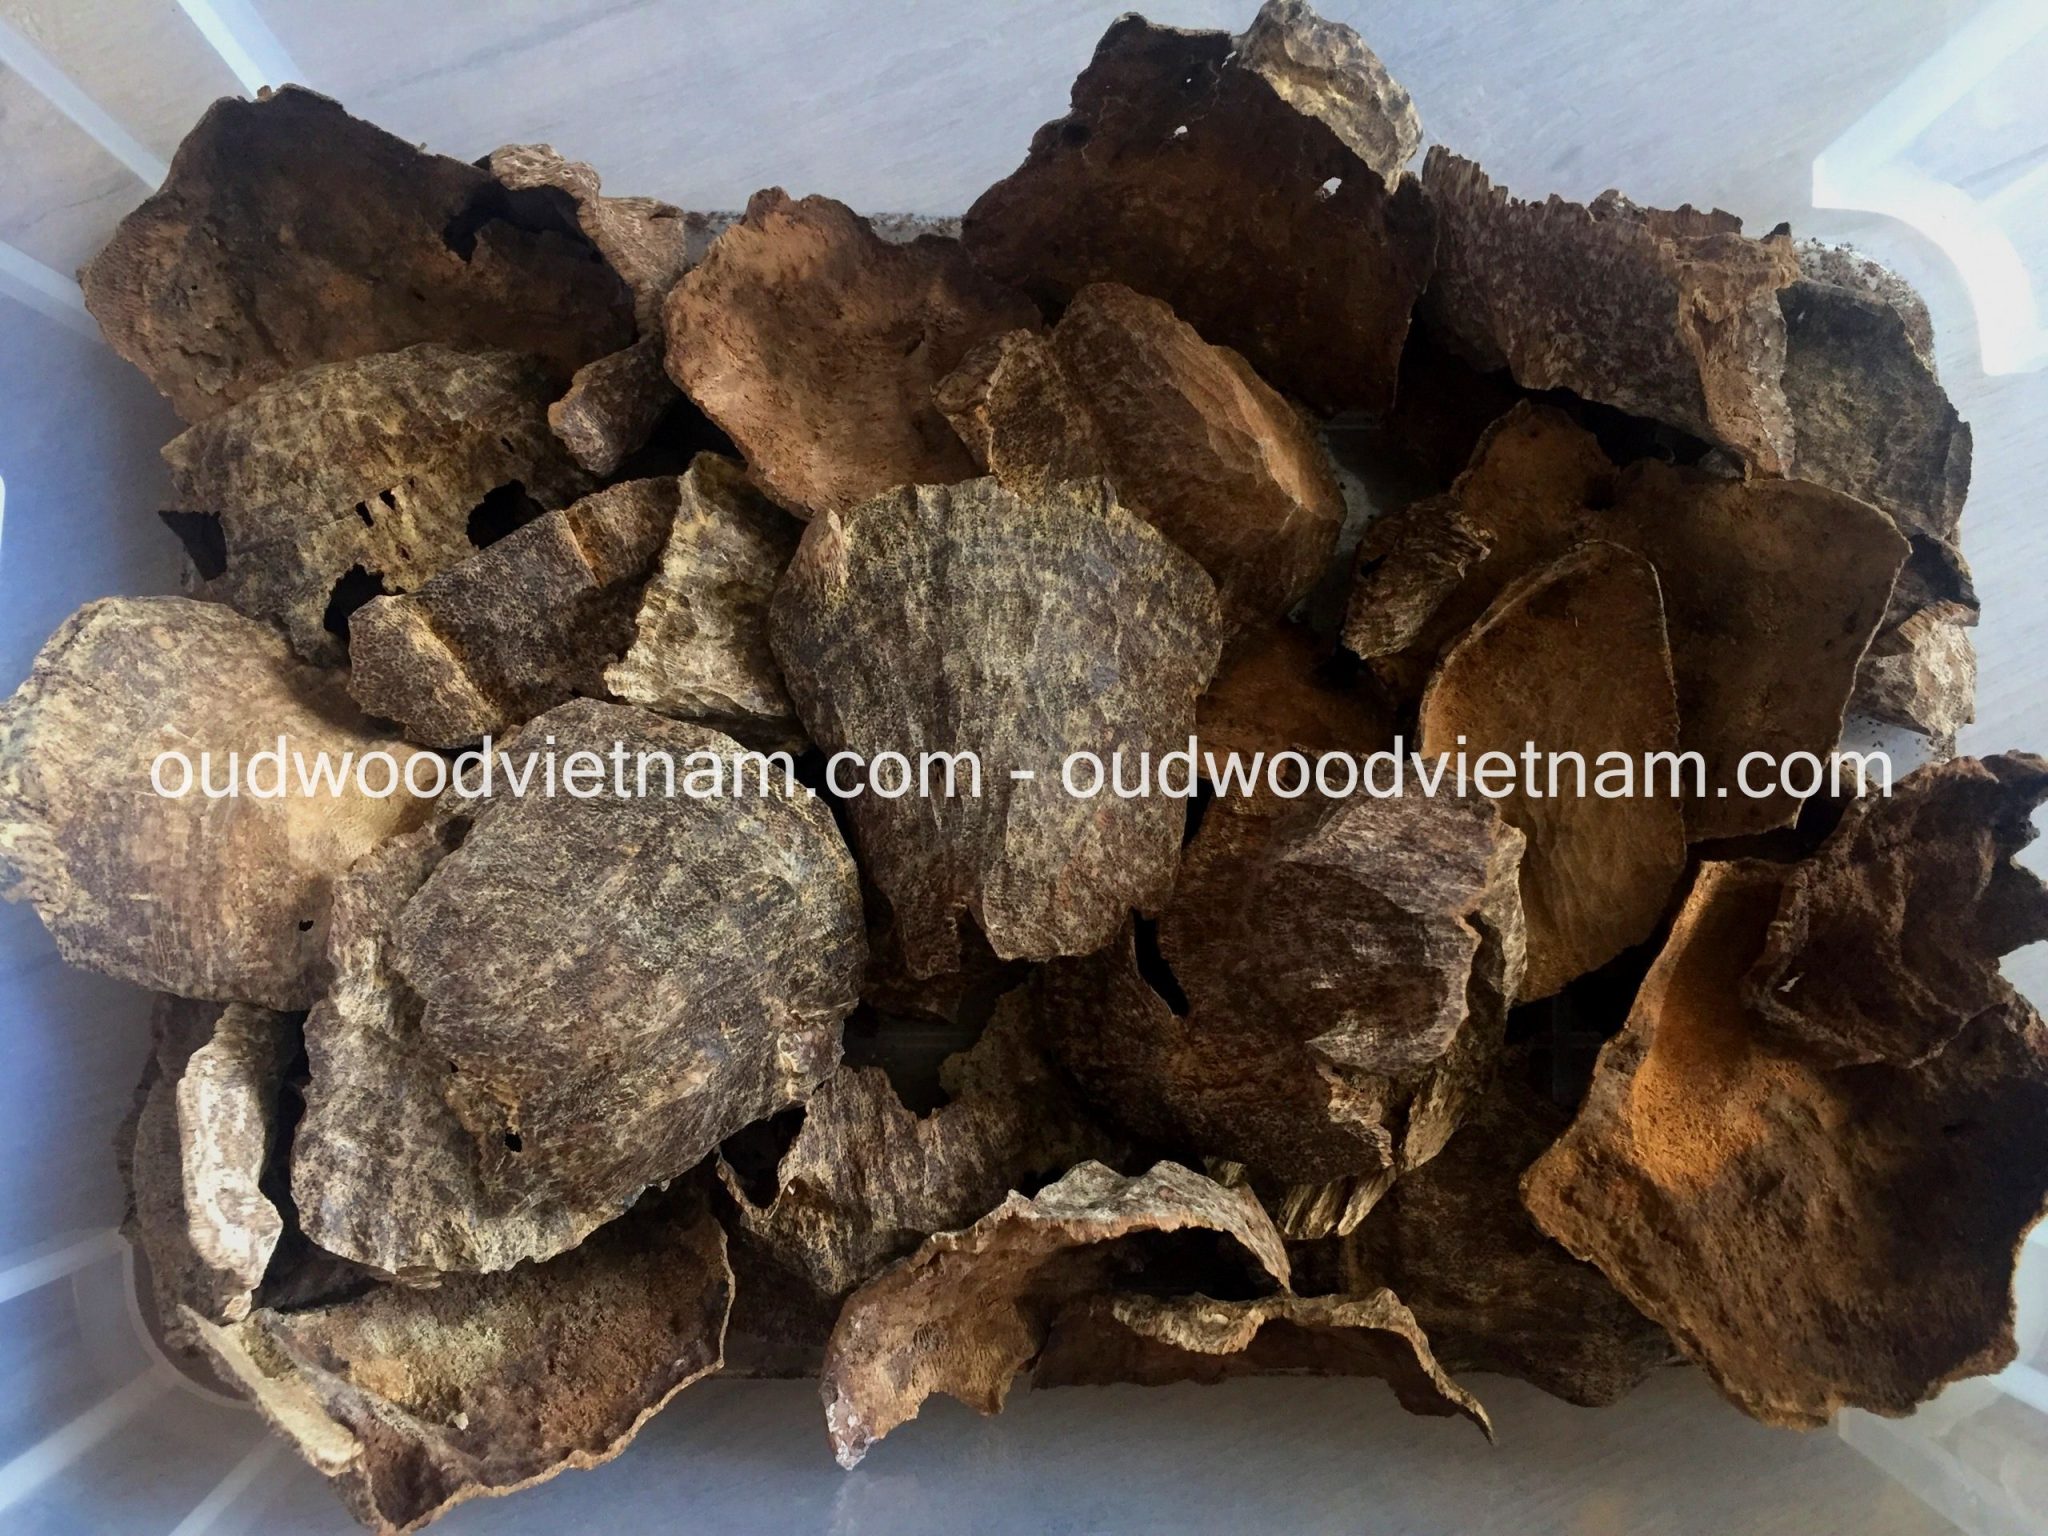 Brand New Details about   1x 30g Malaysia Bakhoor Oud Vanilla Agarwood Fragrance Incense Chips 